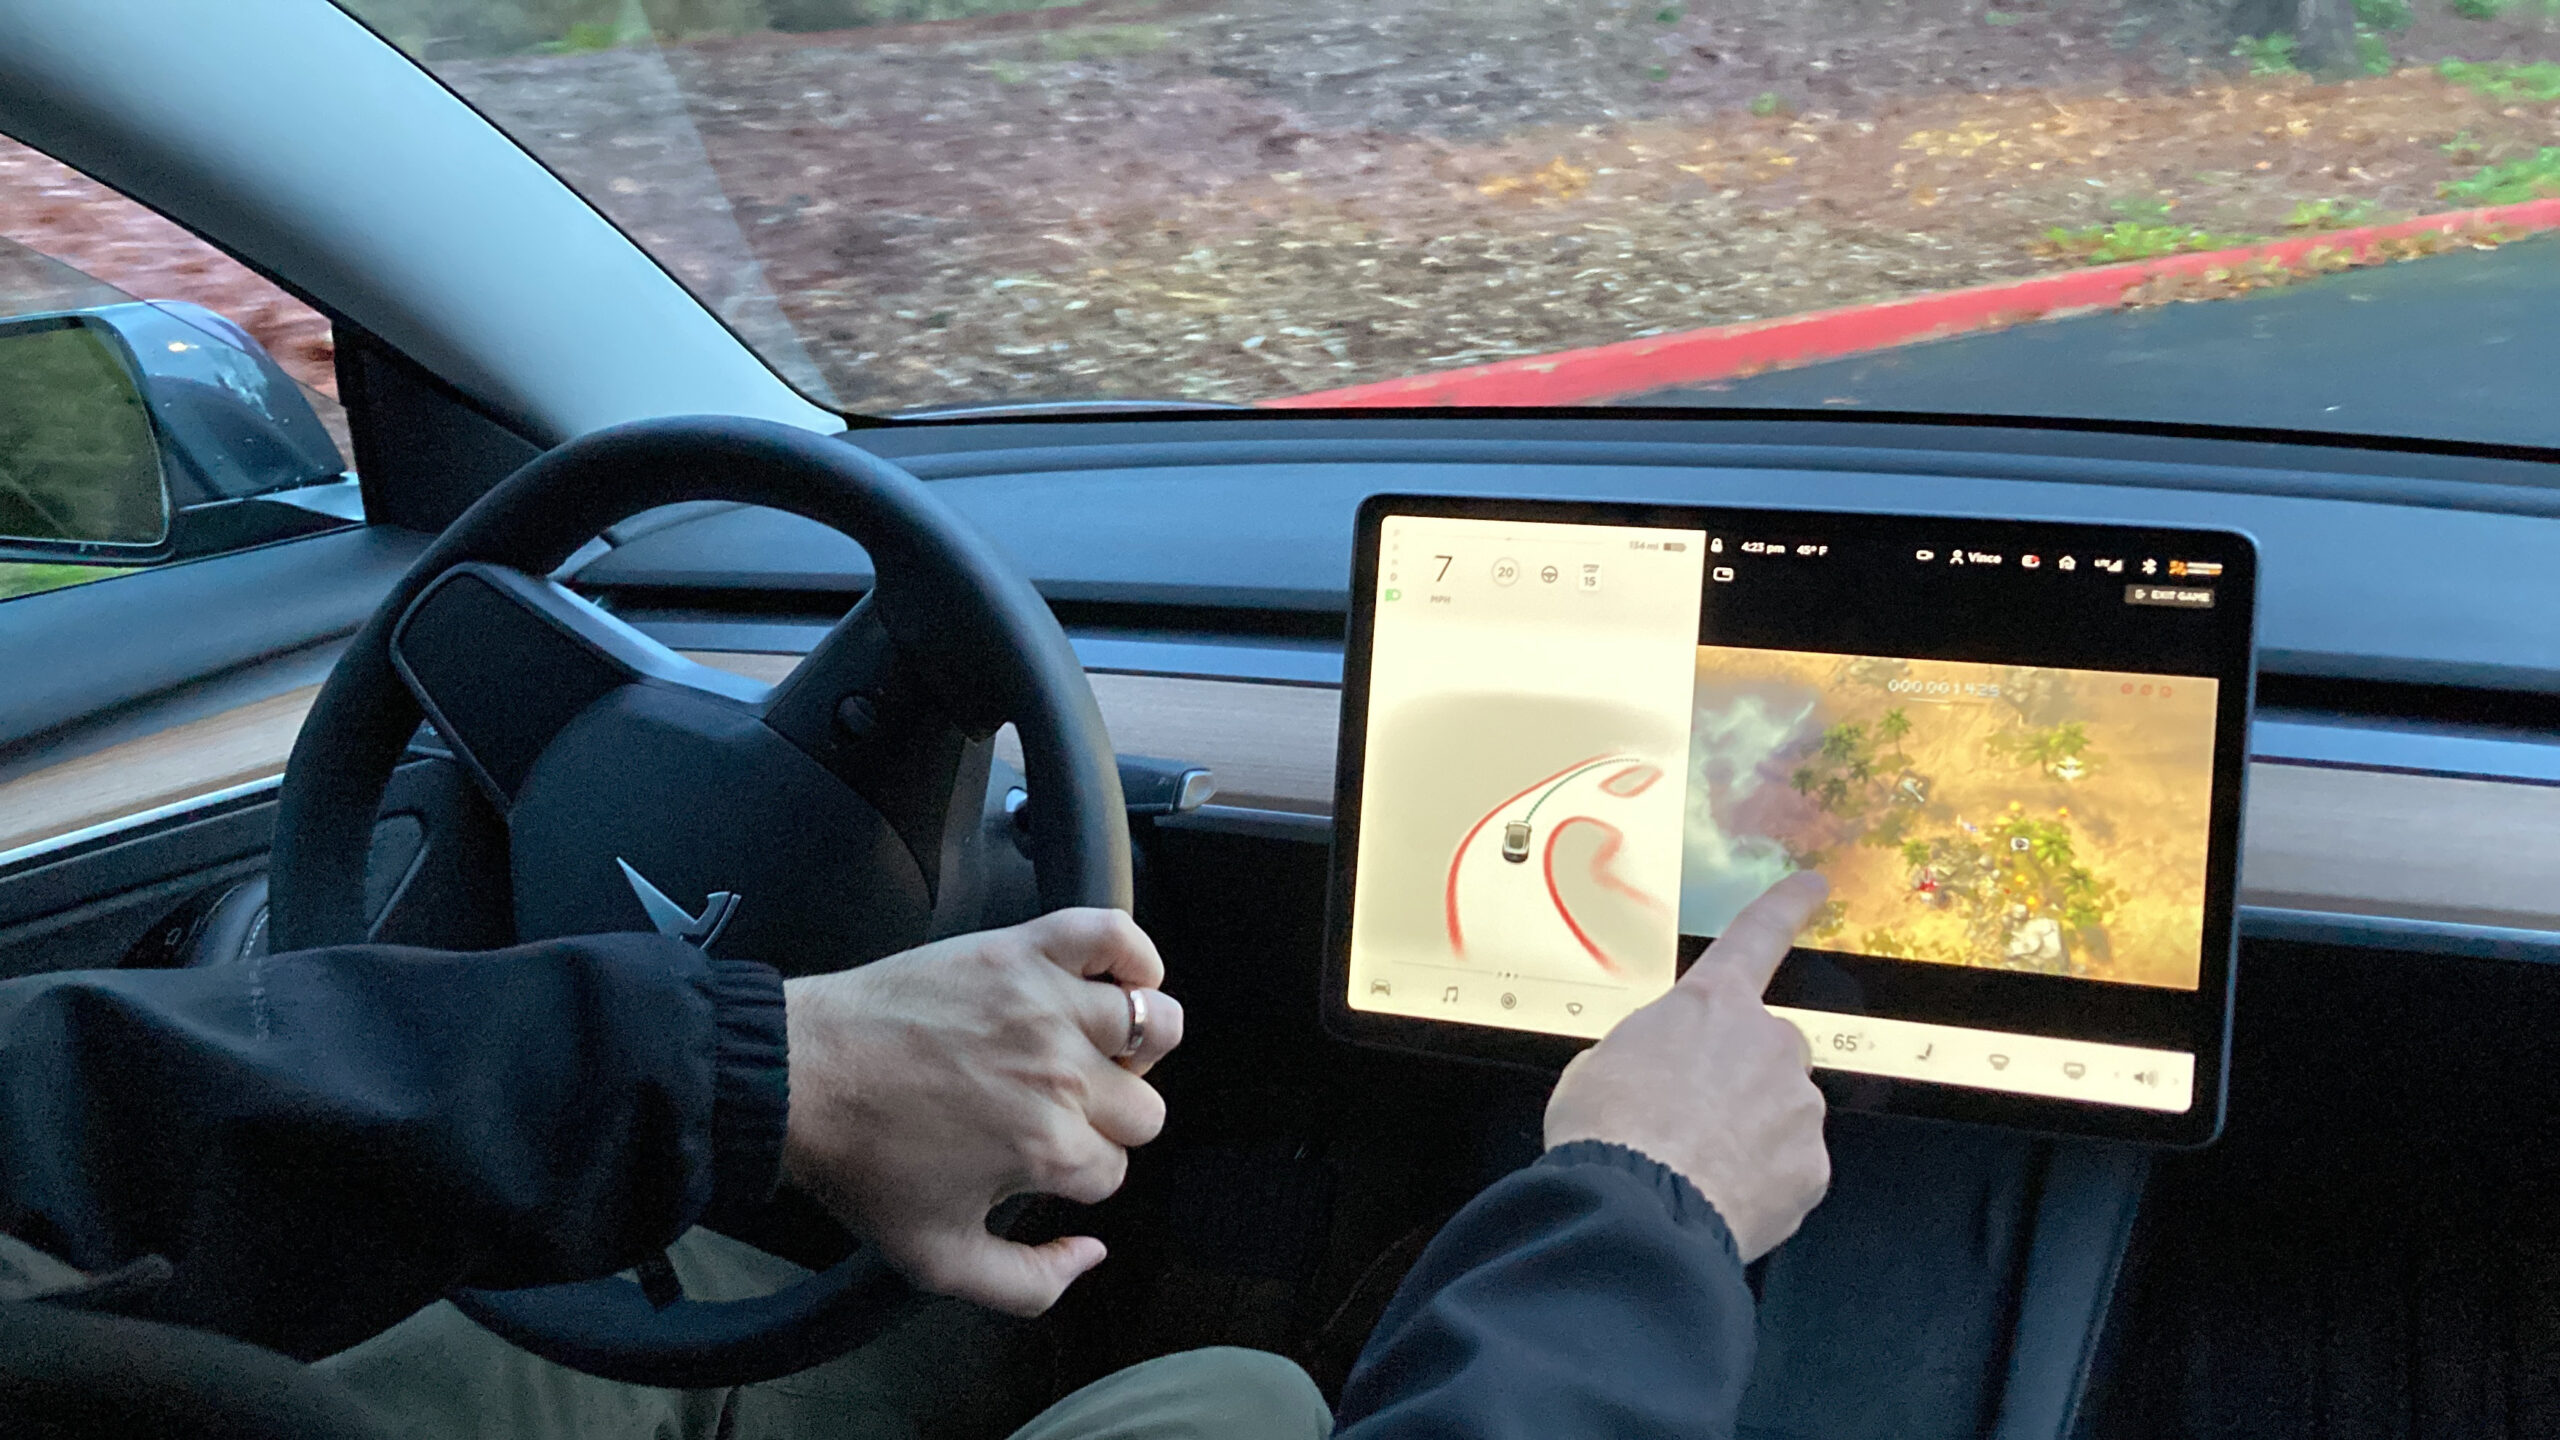 FILE - Vince Patton, a new Tesla owner, demonstrates on Dec. 8, 2021, on a closed course in Portland, Ore., how he can play video games on the vehicle's console while driving. The U.S. has opened a formal investigation into a report that Tesla vehicles allow people to play video games on a center touch screen while they are driving. (AP Photo/Gillian Flaccus, File)